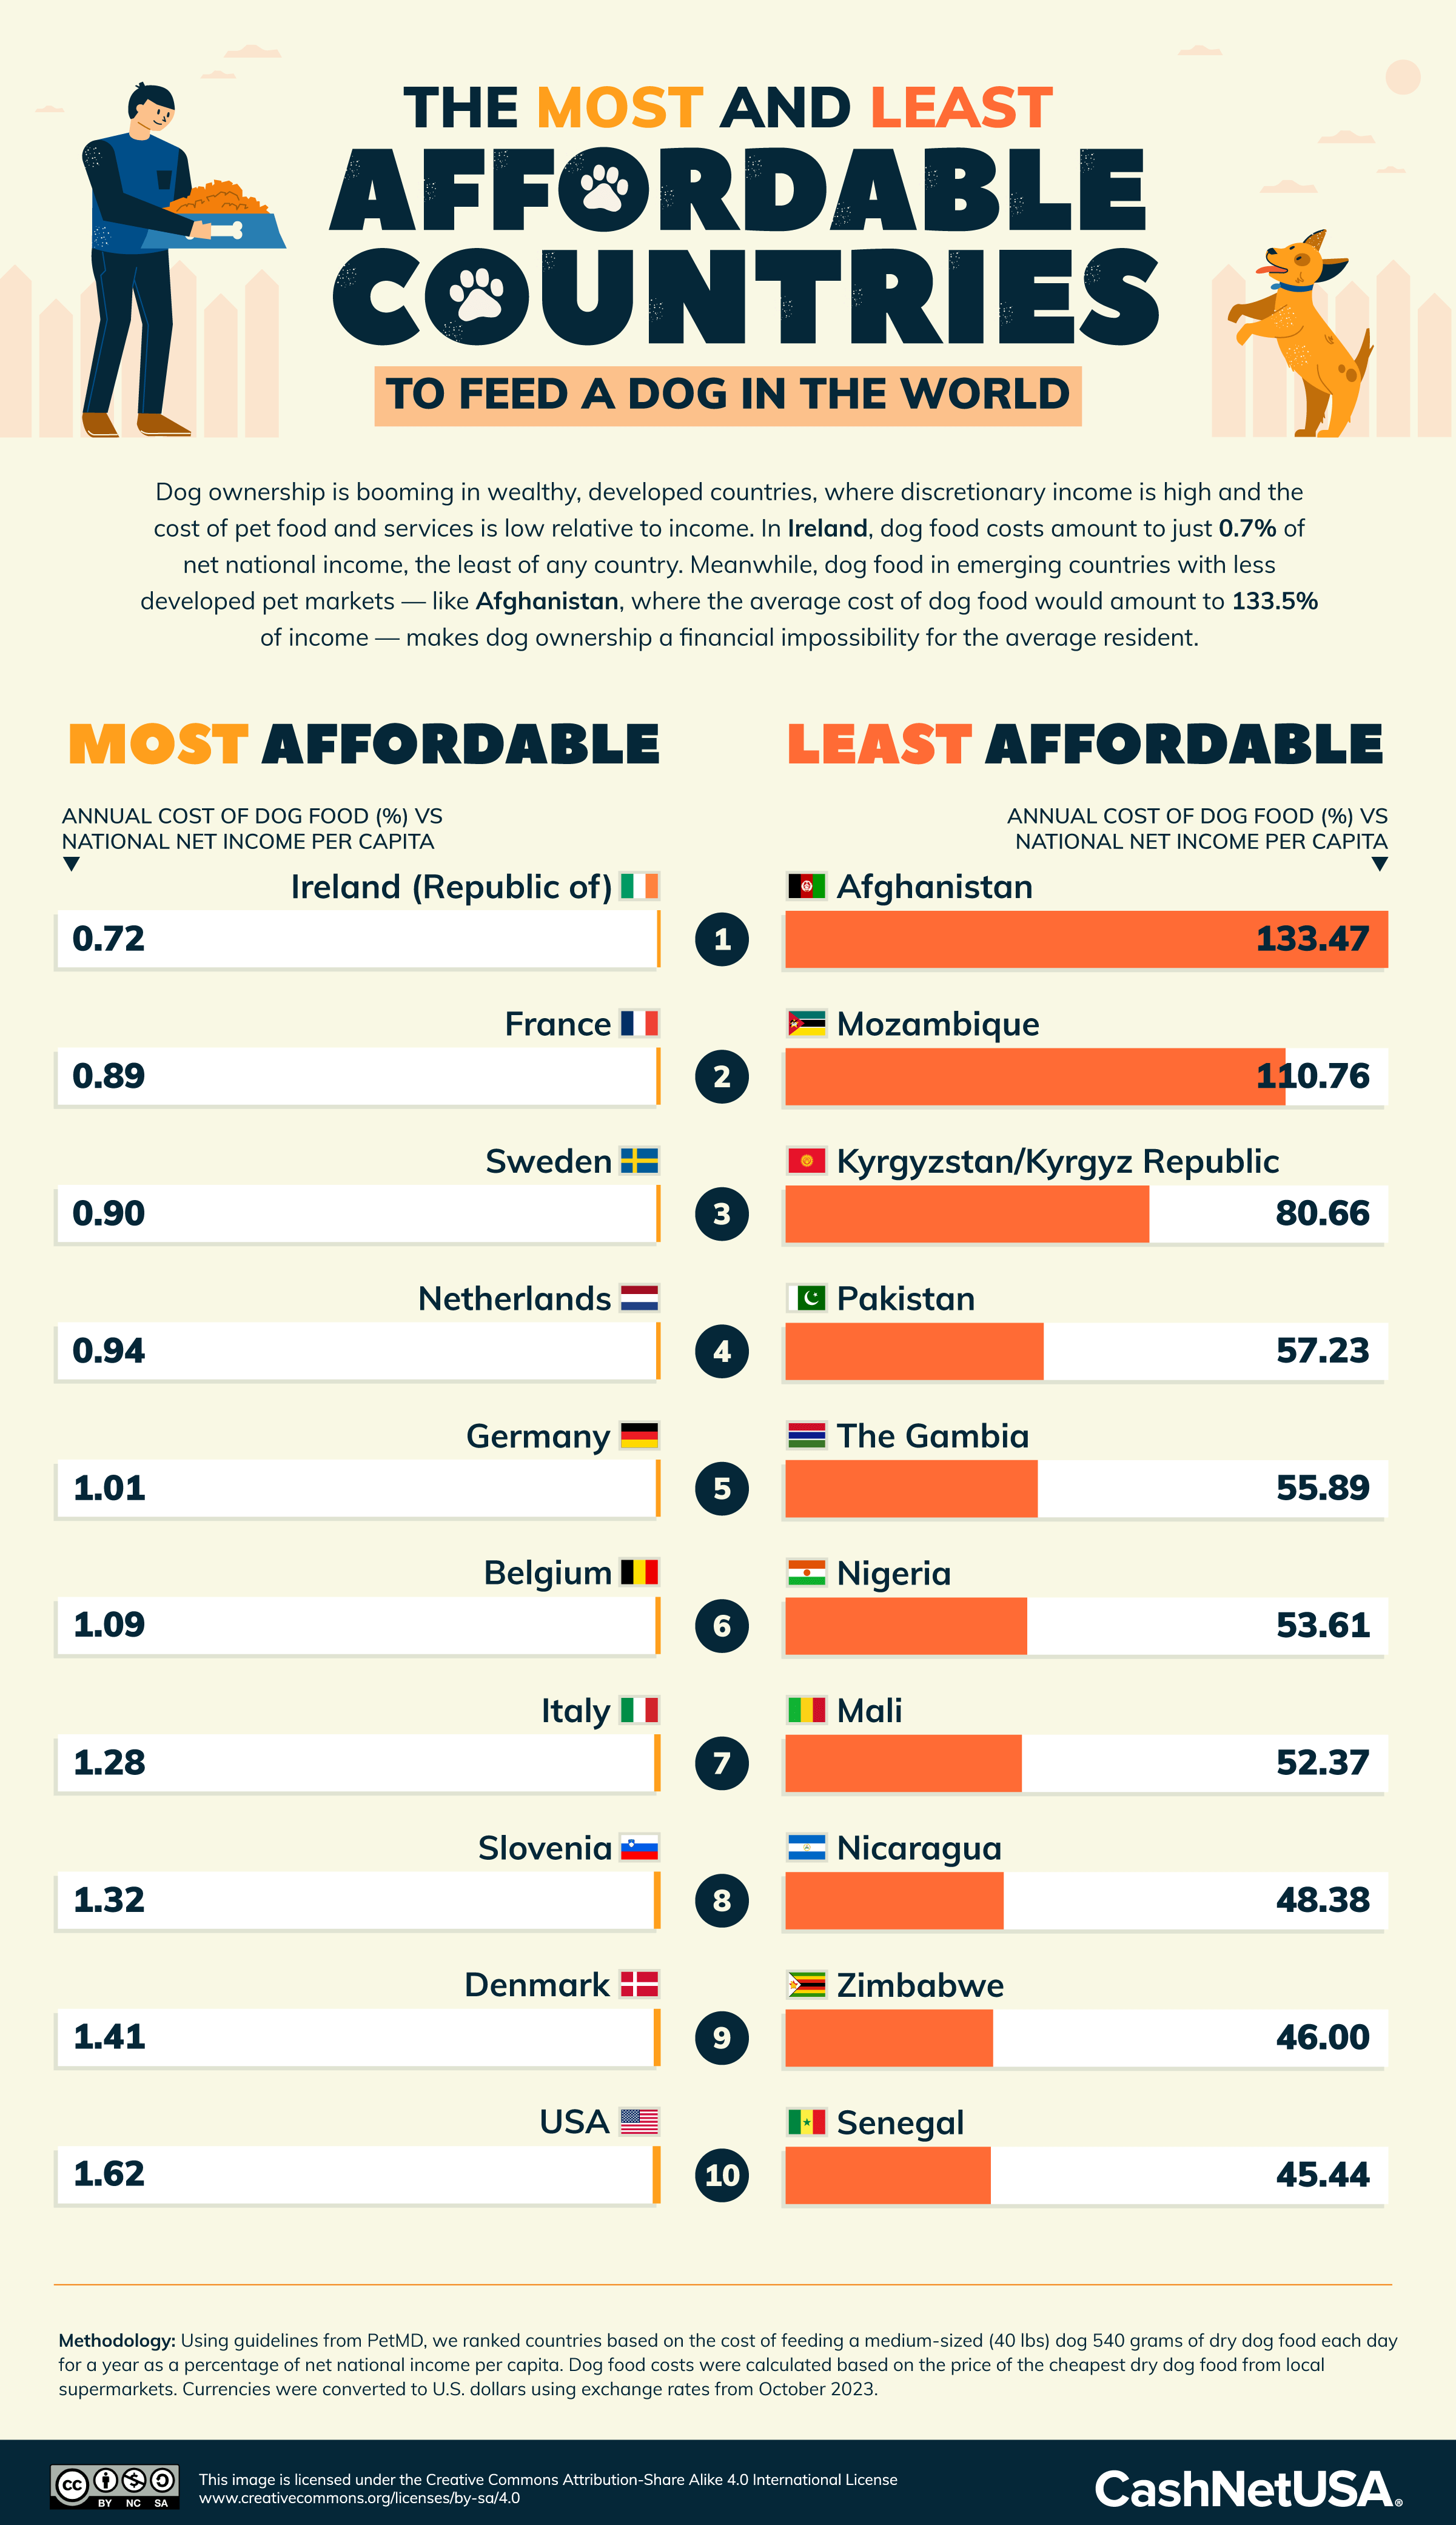 Infographic of the most and least affordable countries to feed a dog.